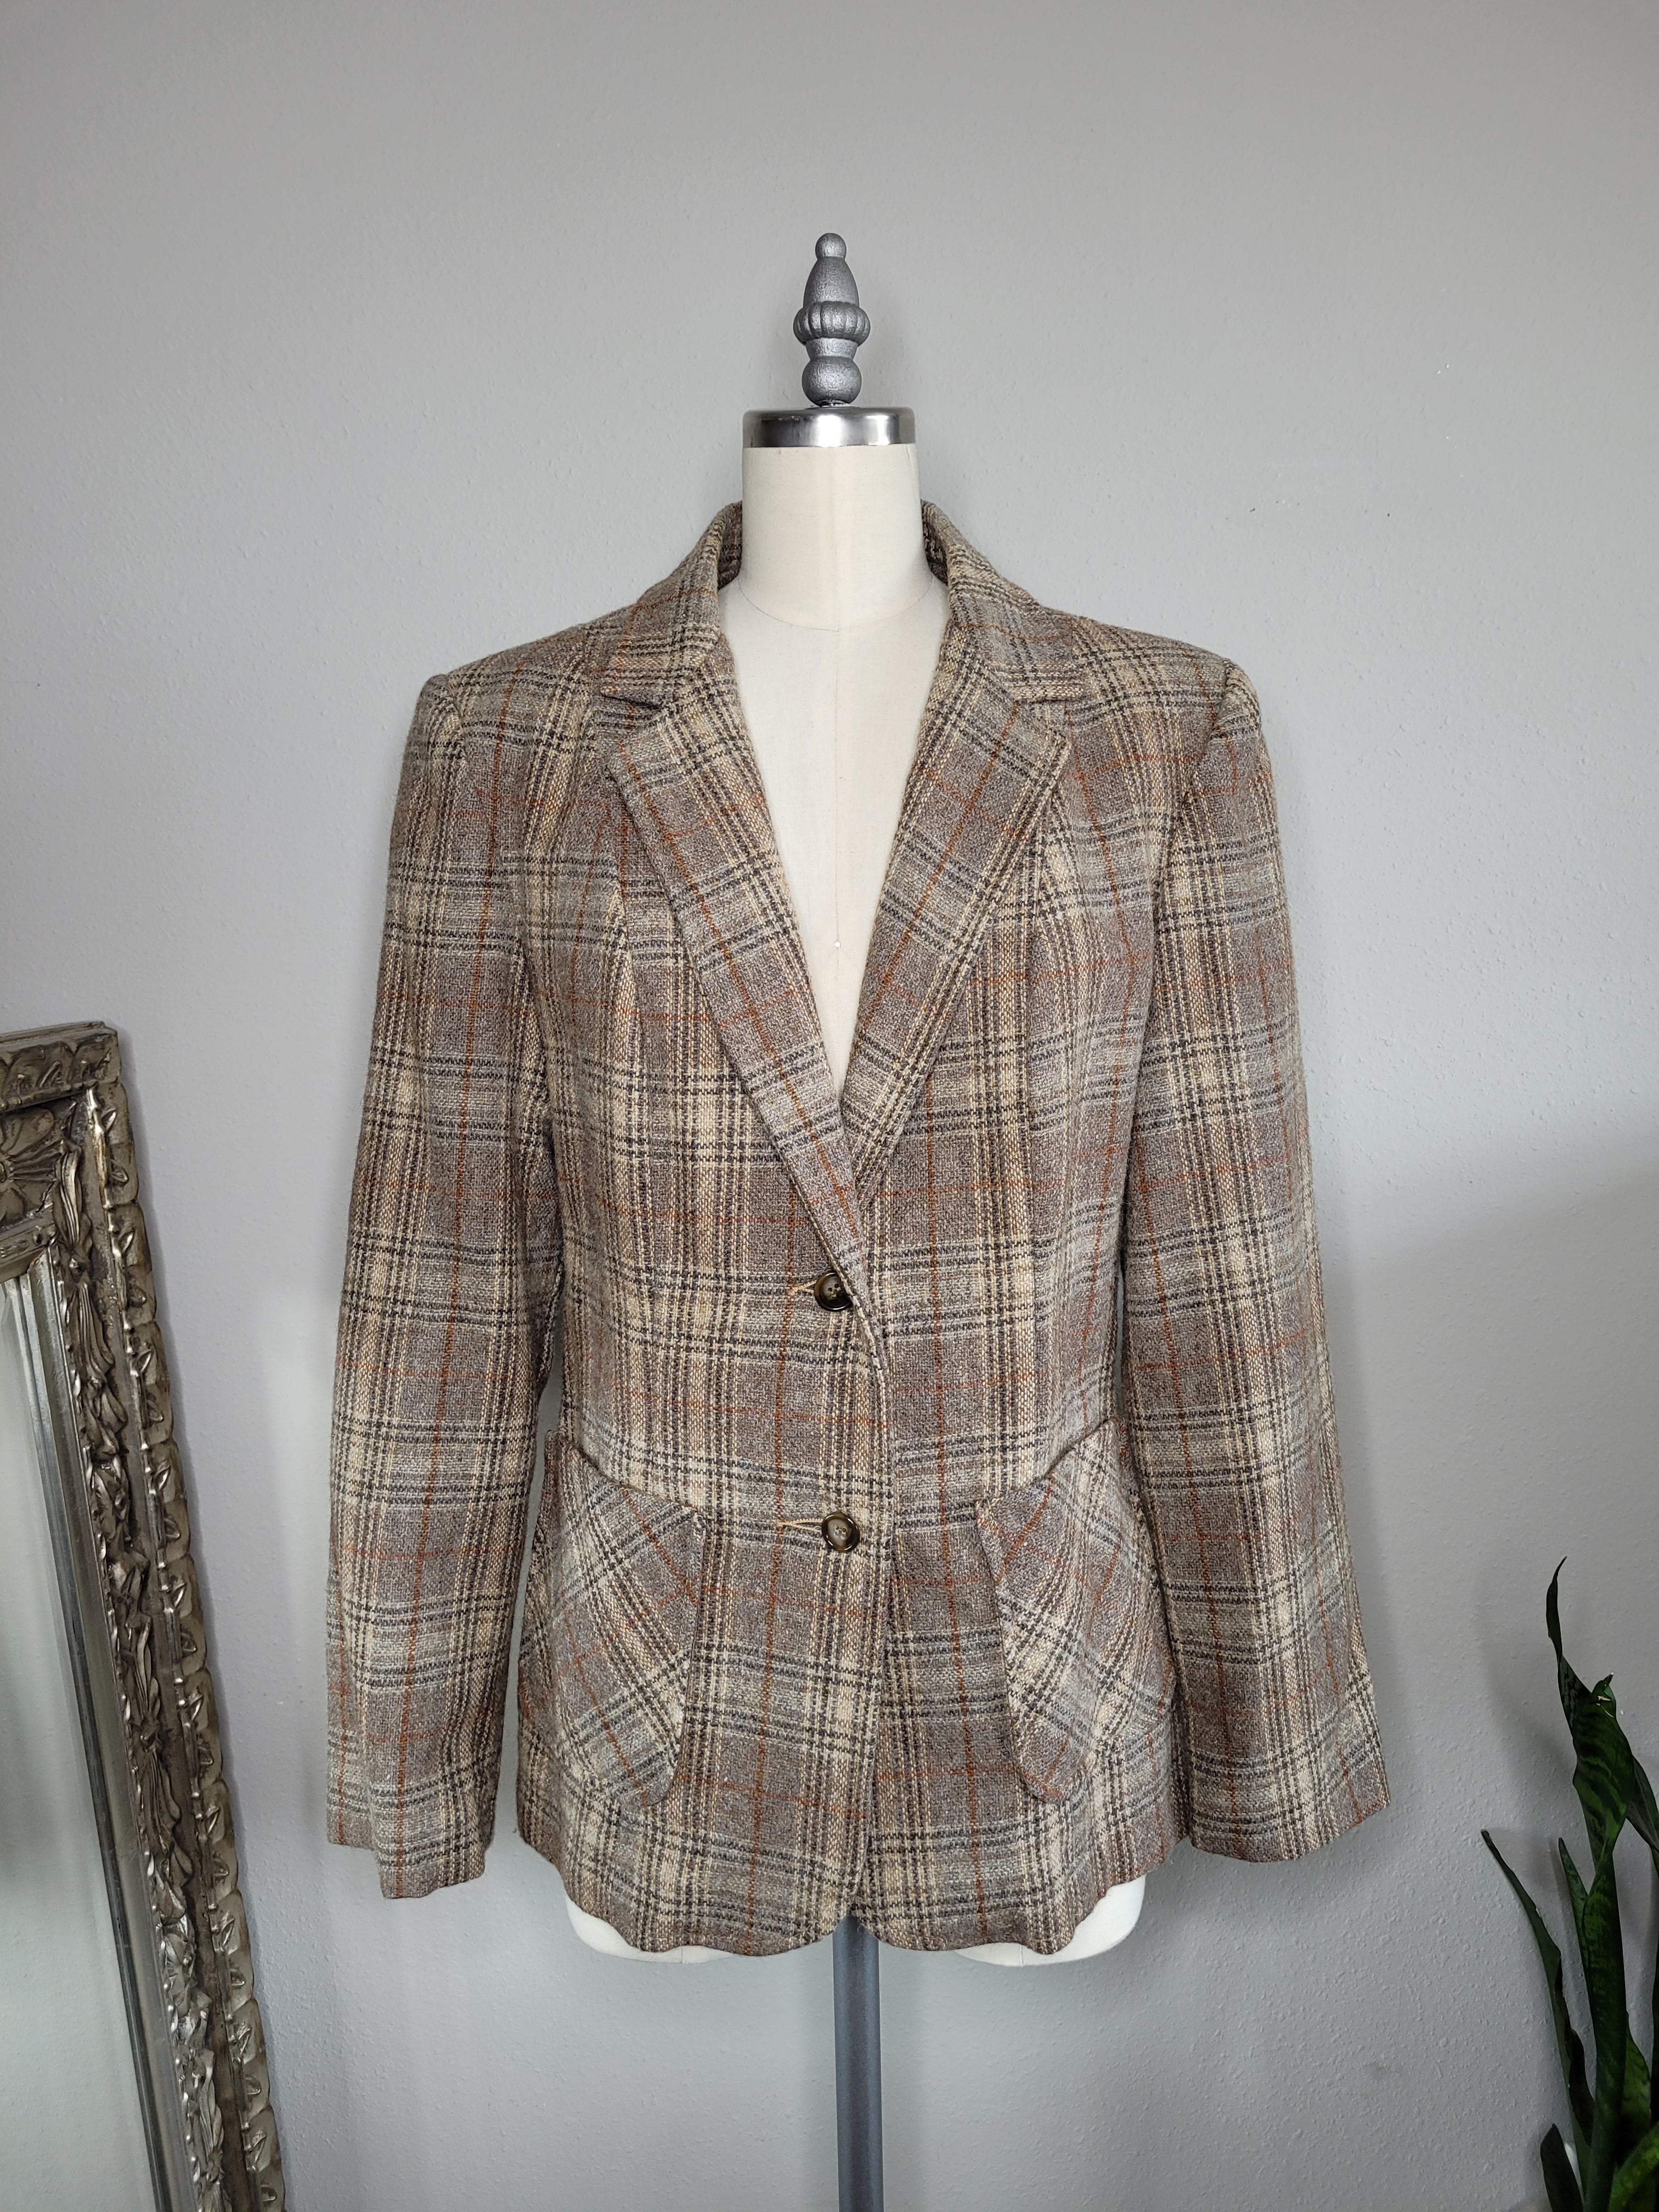 Vintage 80s/90s Beige Plaid Wool Blazer By Jh Collectibles | Shop THRILLING